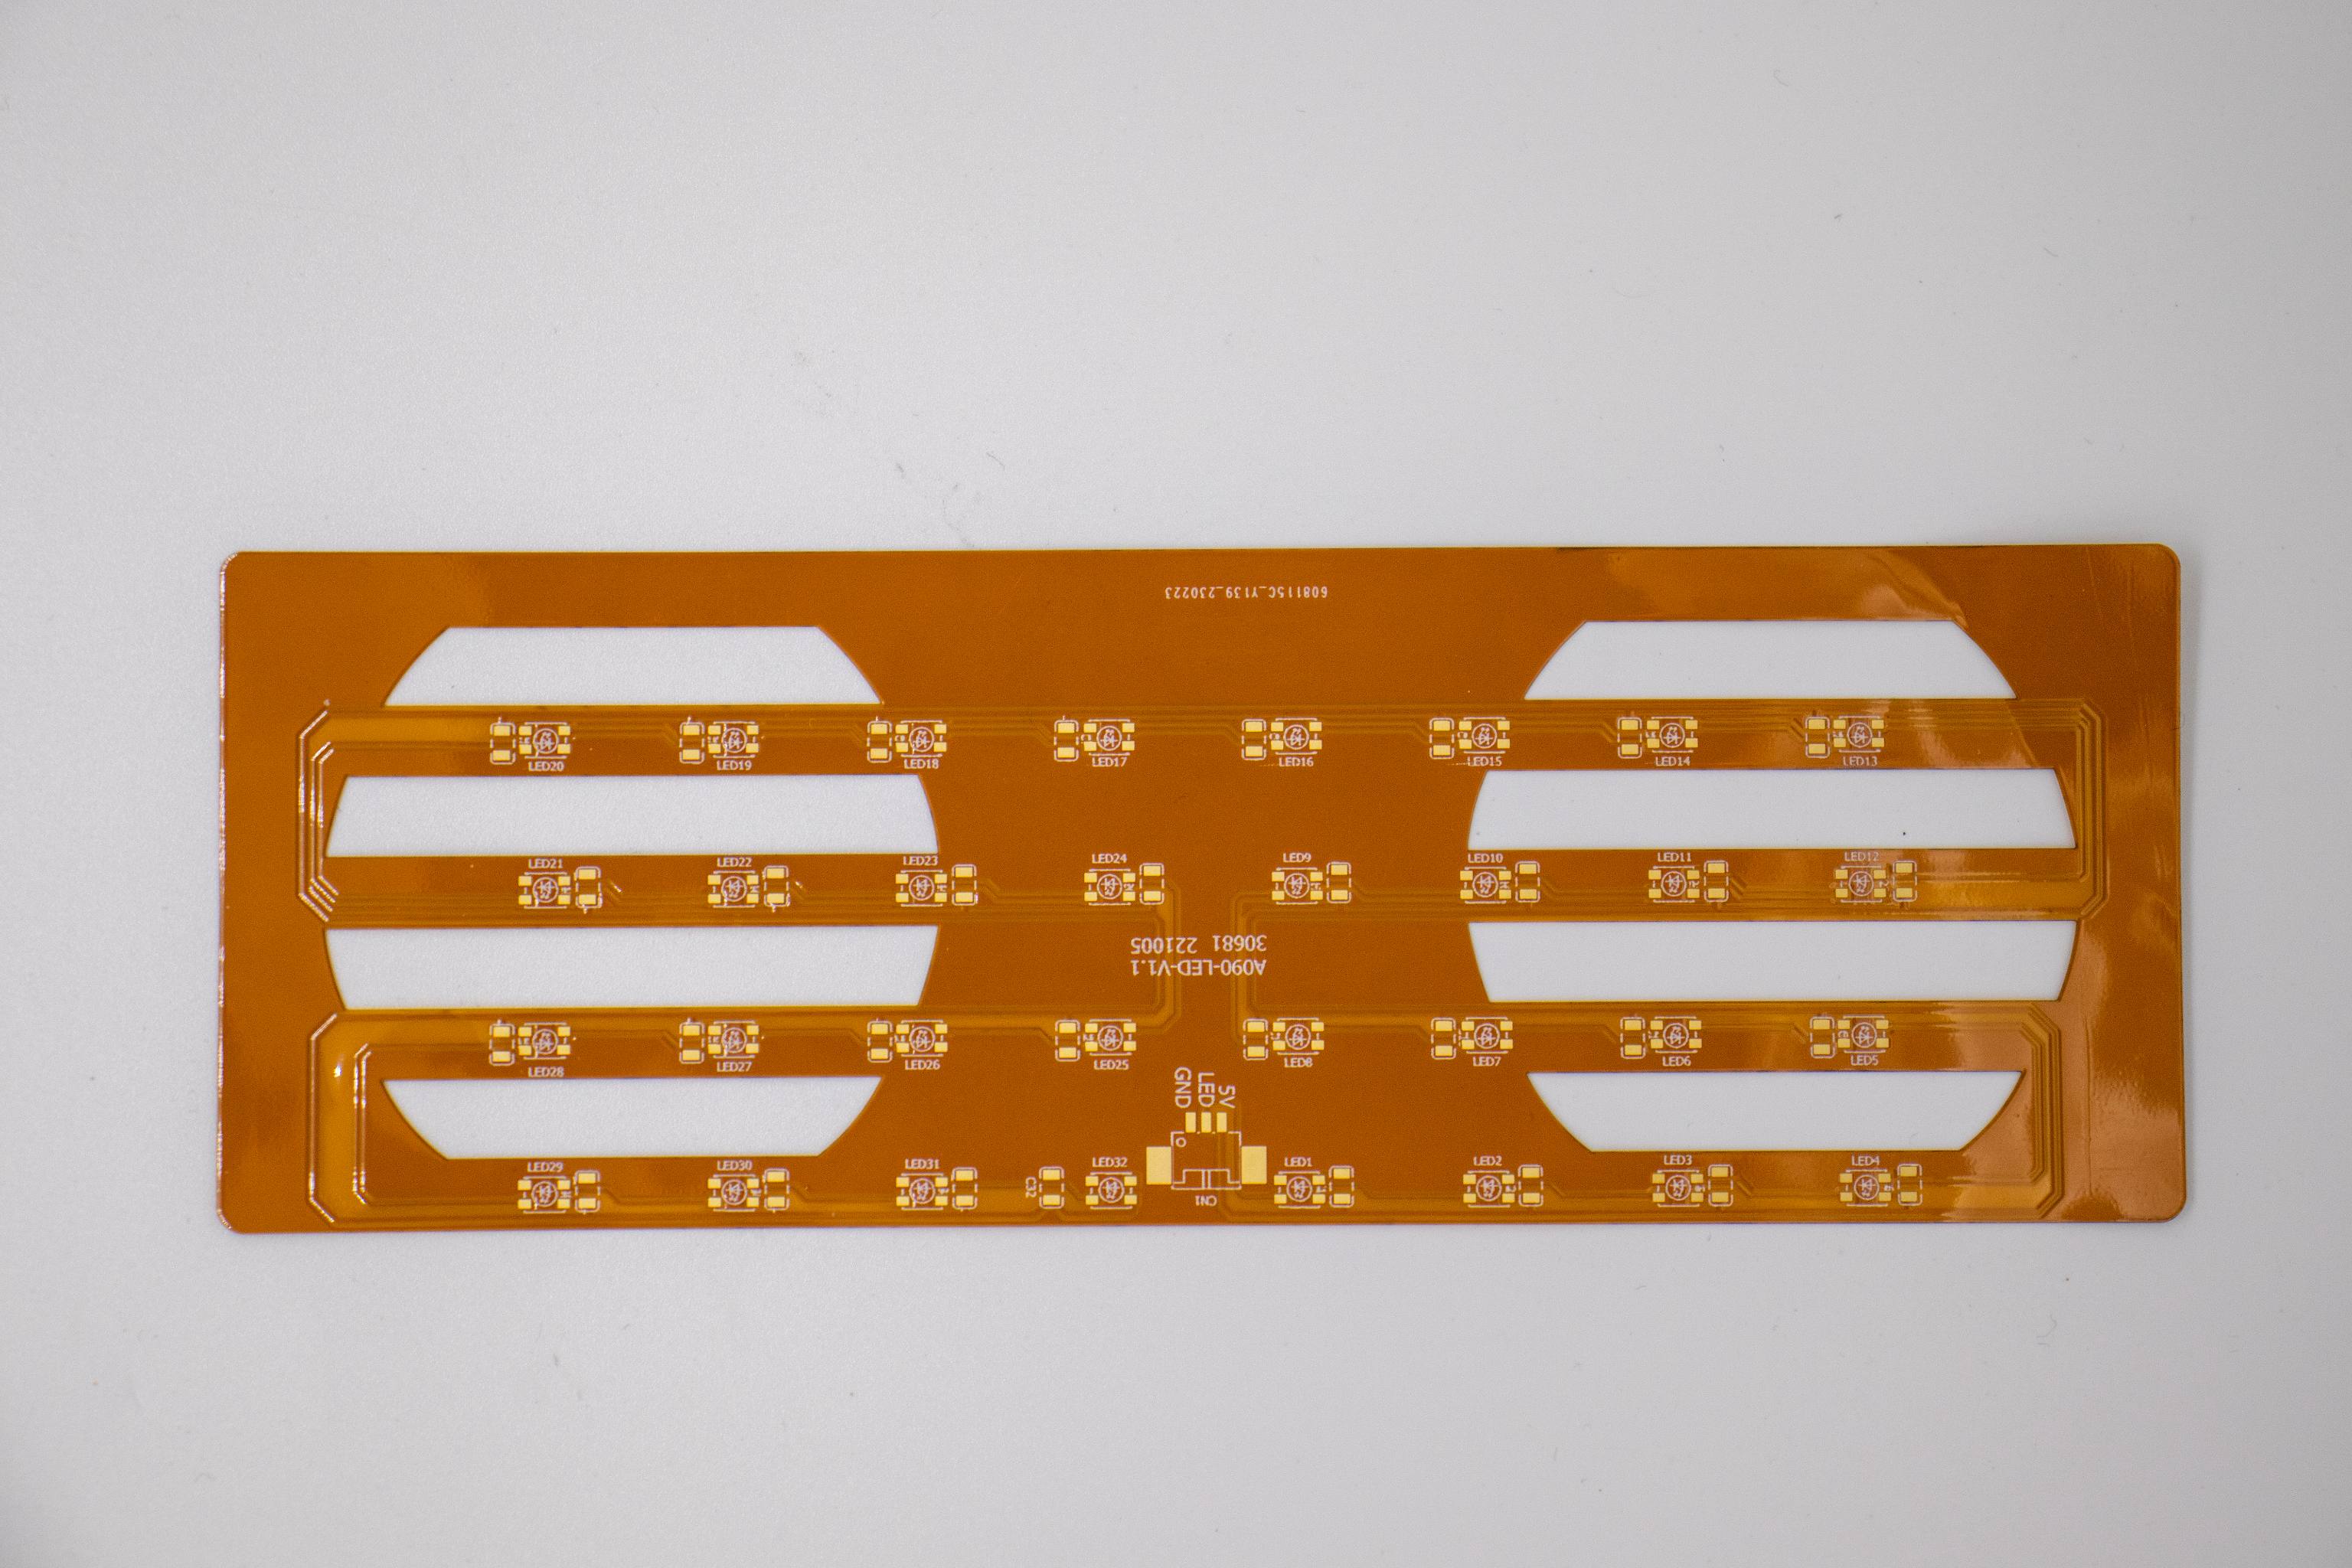 Designing with Flexible PCBs